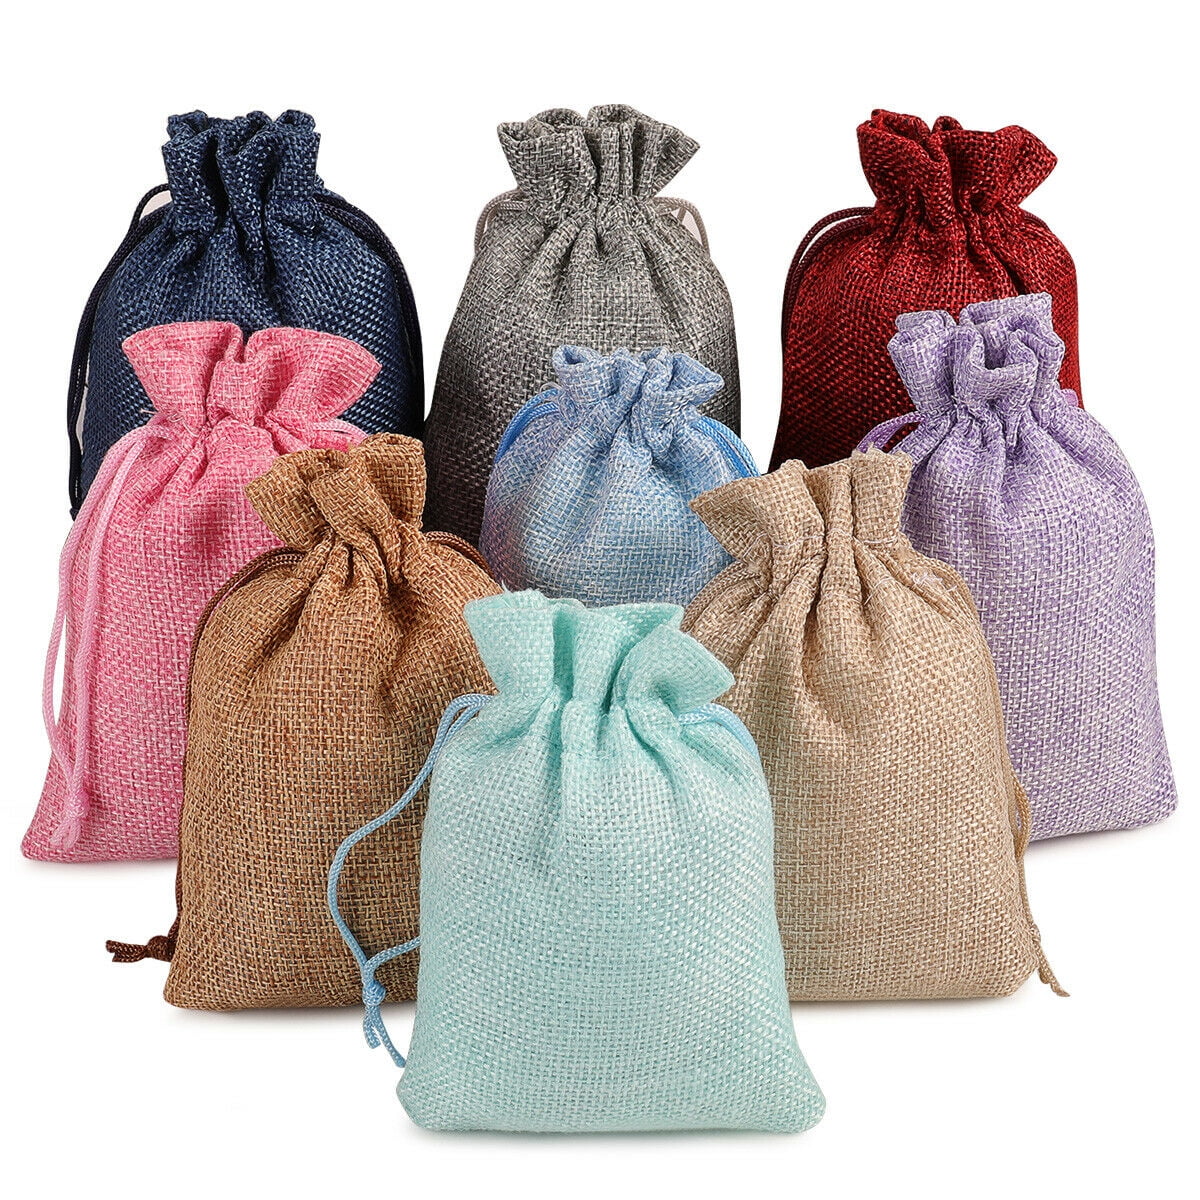 Jewelry Vintage Party Storage Wrap Resusable Jute Gift Bags for Wedding Favor 10 x 15cm Naler 20pcs Burlap Bags with Drawstring